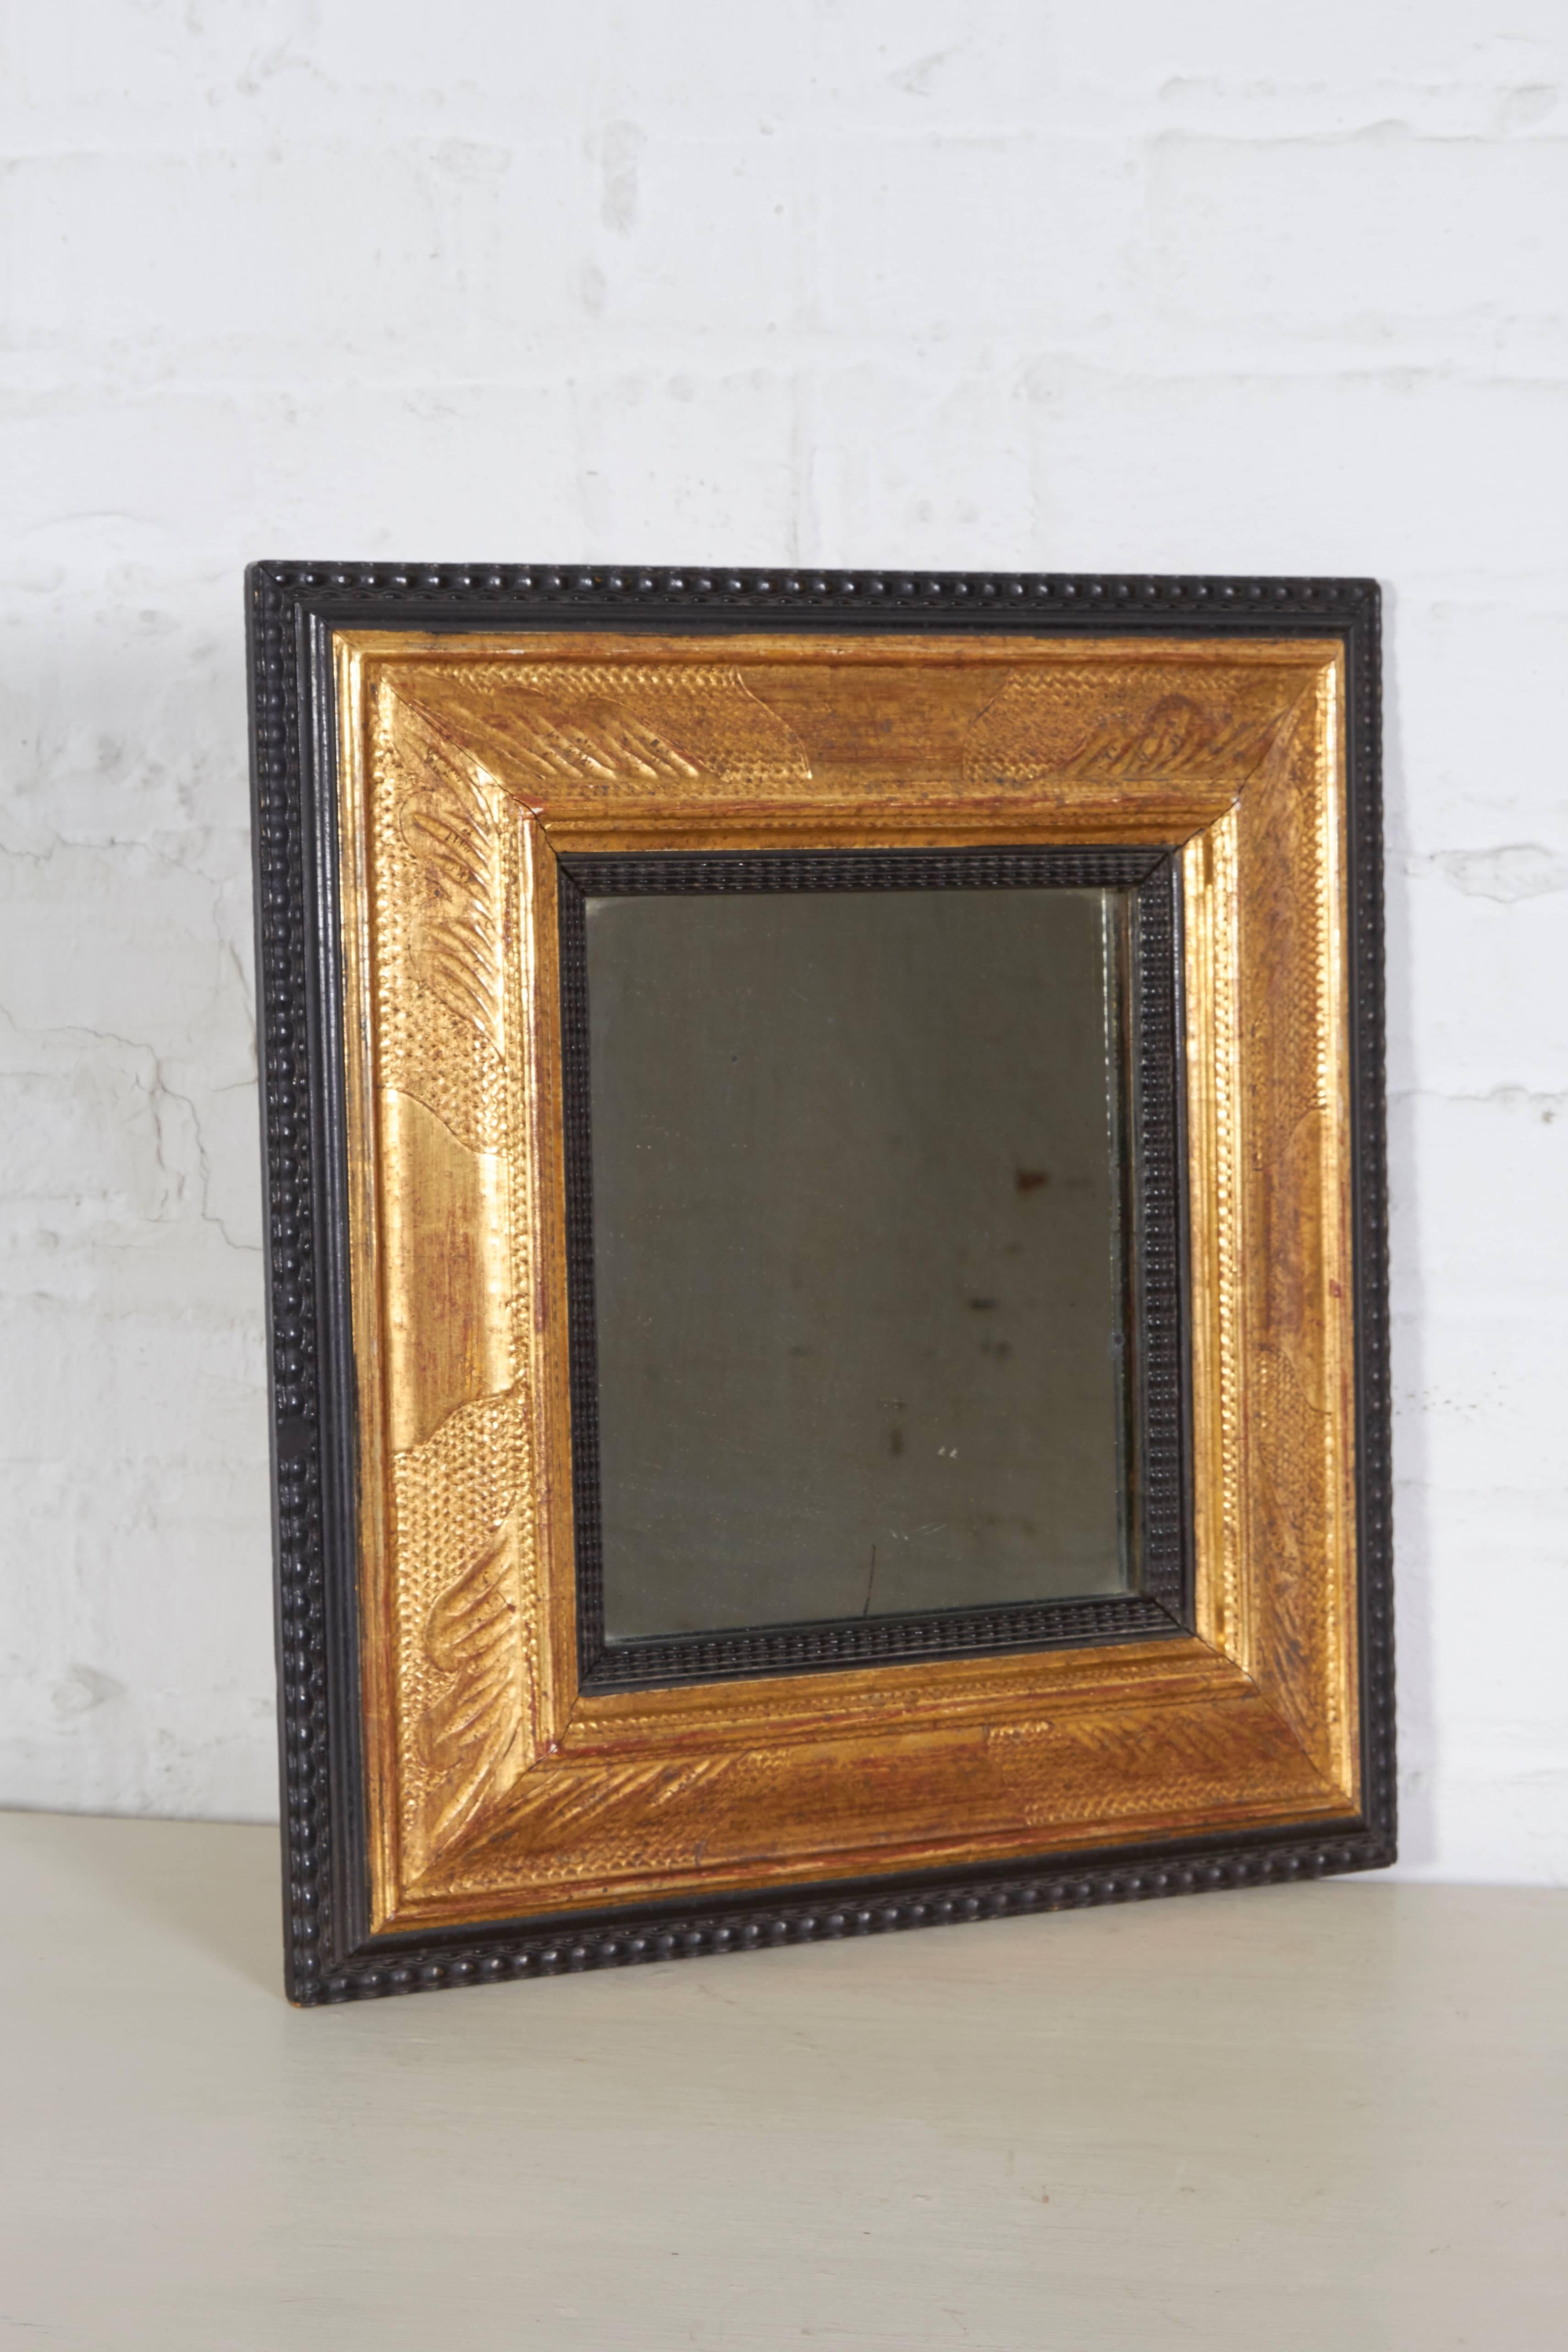 The rectangular mirror plate set within a conforming hand-carved frame with ripple cut edge and giltwood surround. Bearing Heydenryk label on reverse.